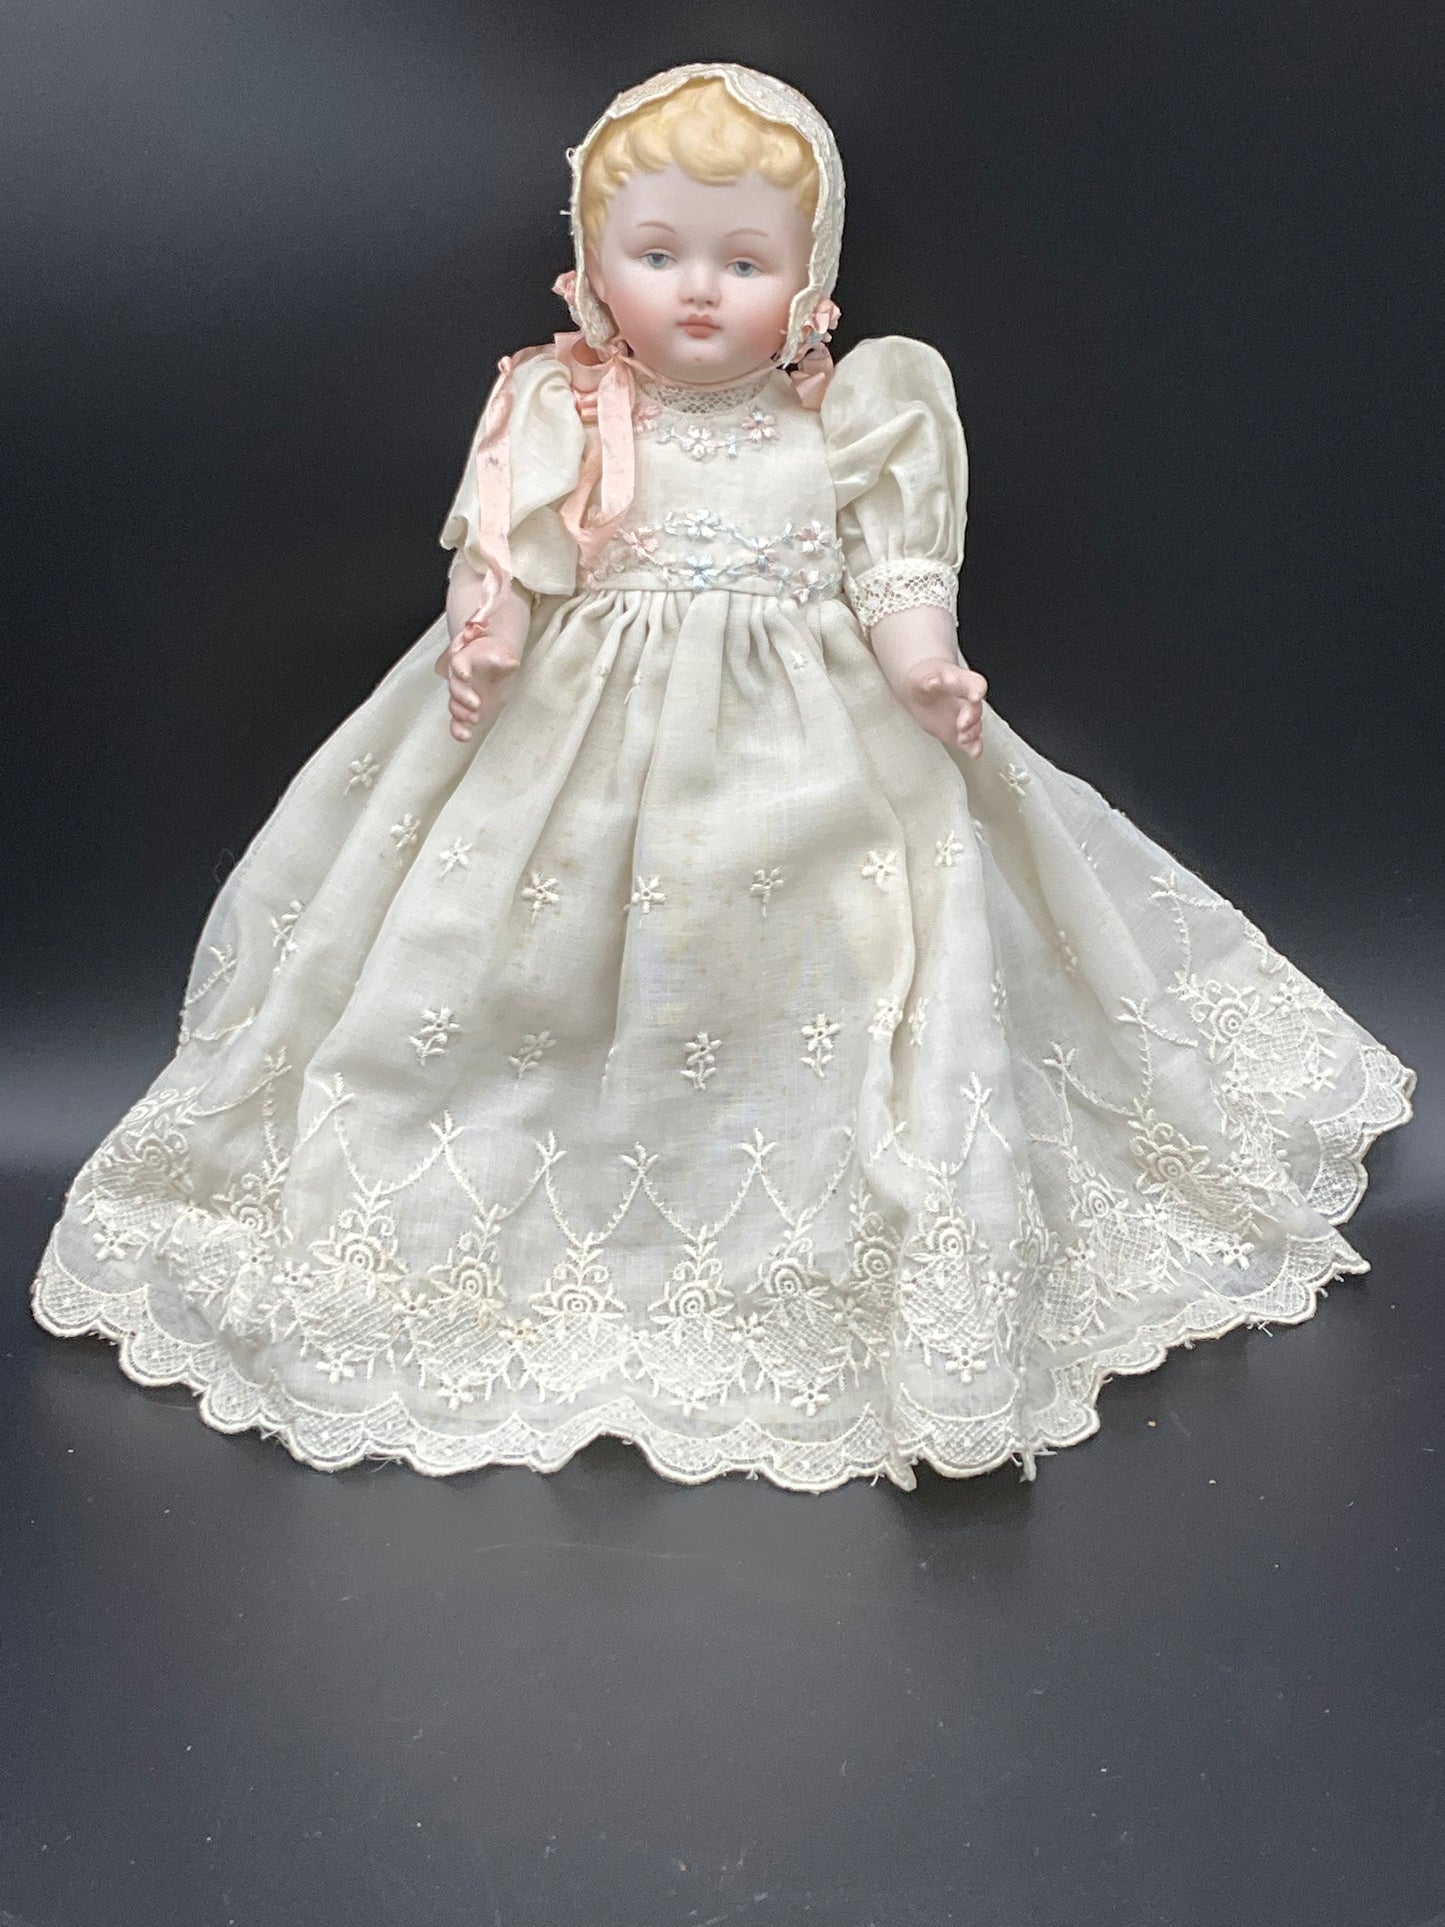 Porcelain Doll - Collector's Dream